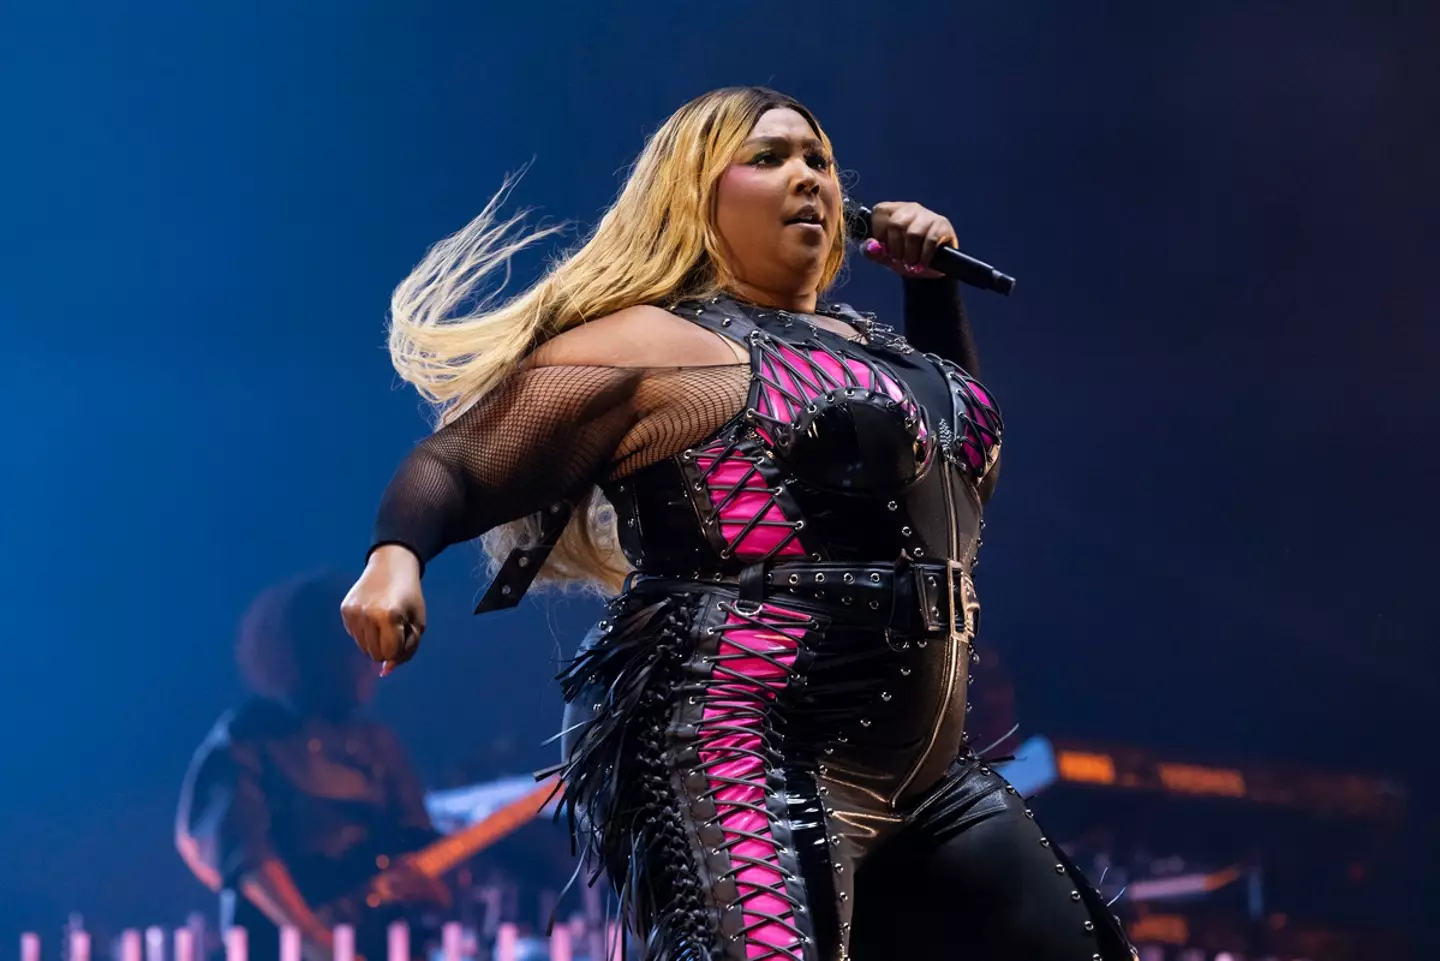 Lizzo is known for promoting body positivity.